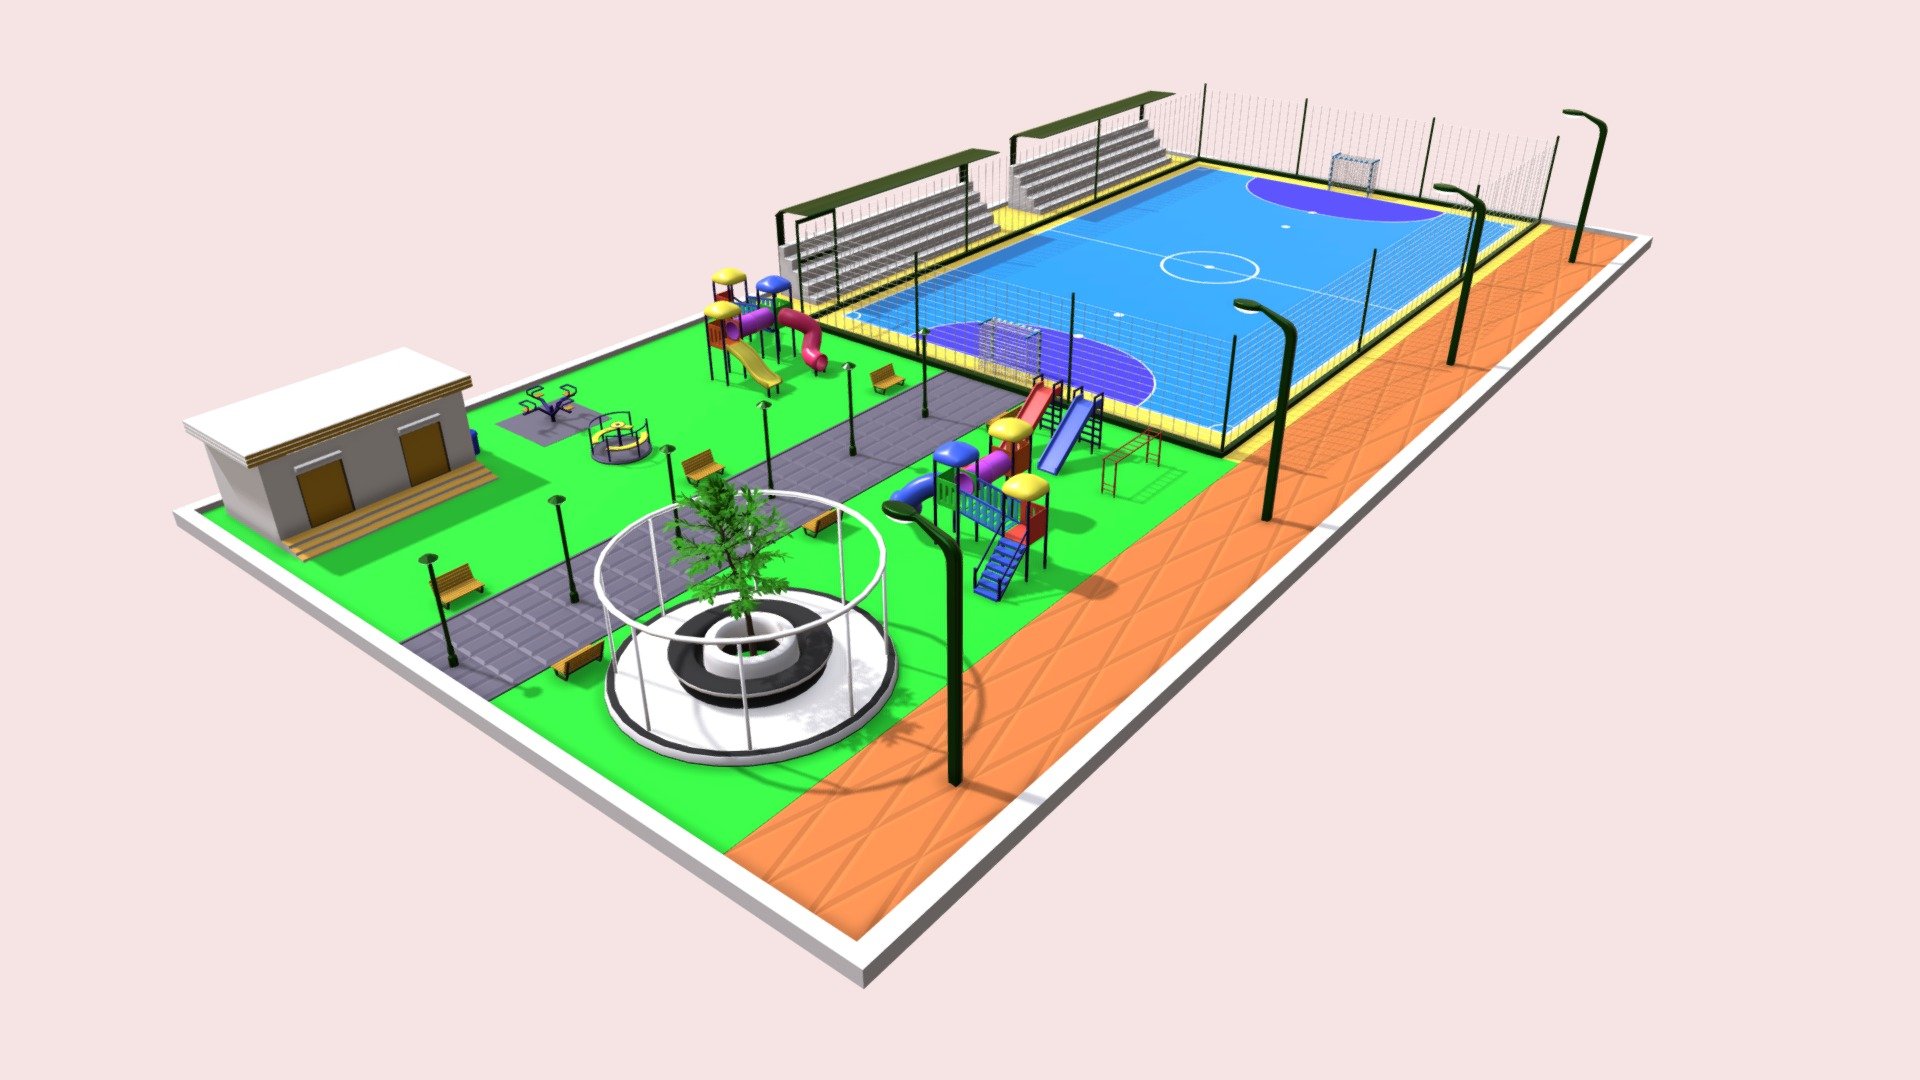 Small amusement park with slides, slides, dome, toilets and a futsal court - Playground - Children's park - 3D - Buy Royalty Free 3D model by Shin Xiba 3D (@Xiba3D) 3d model